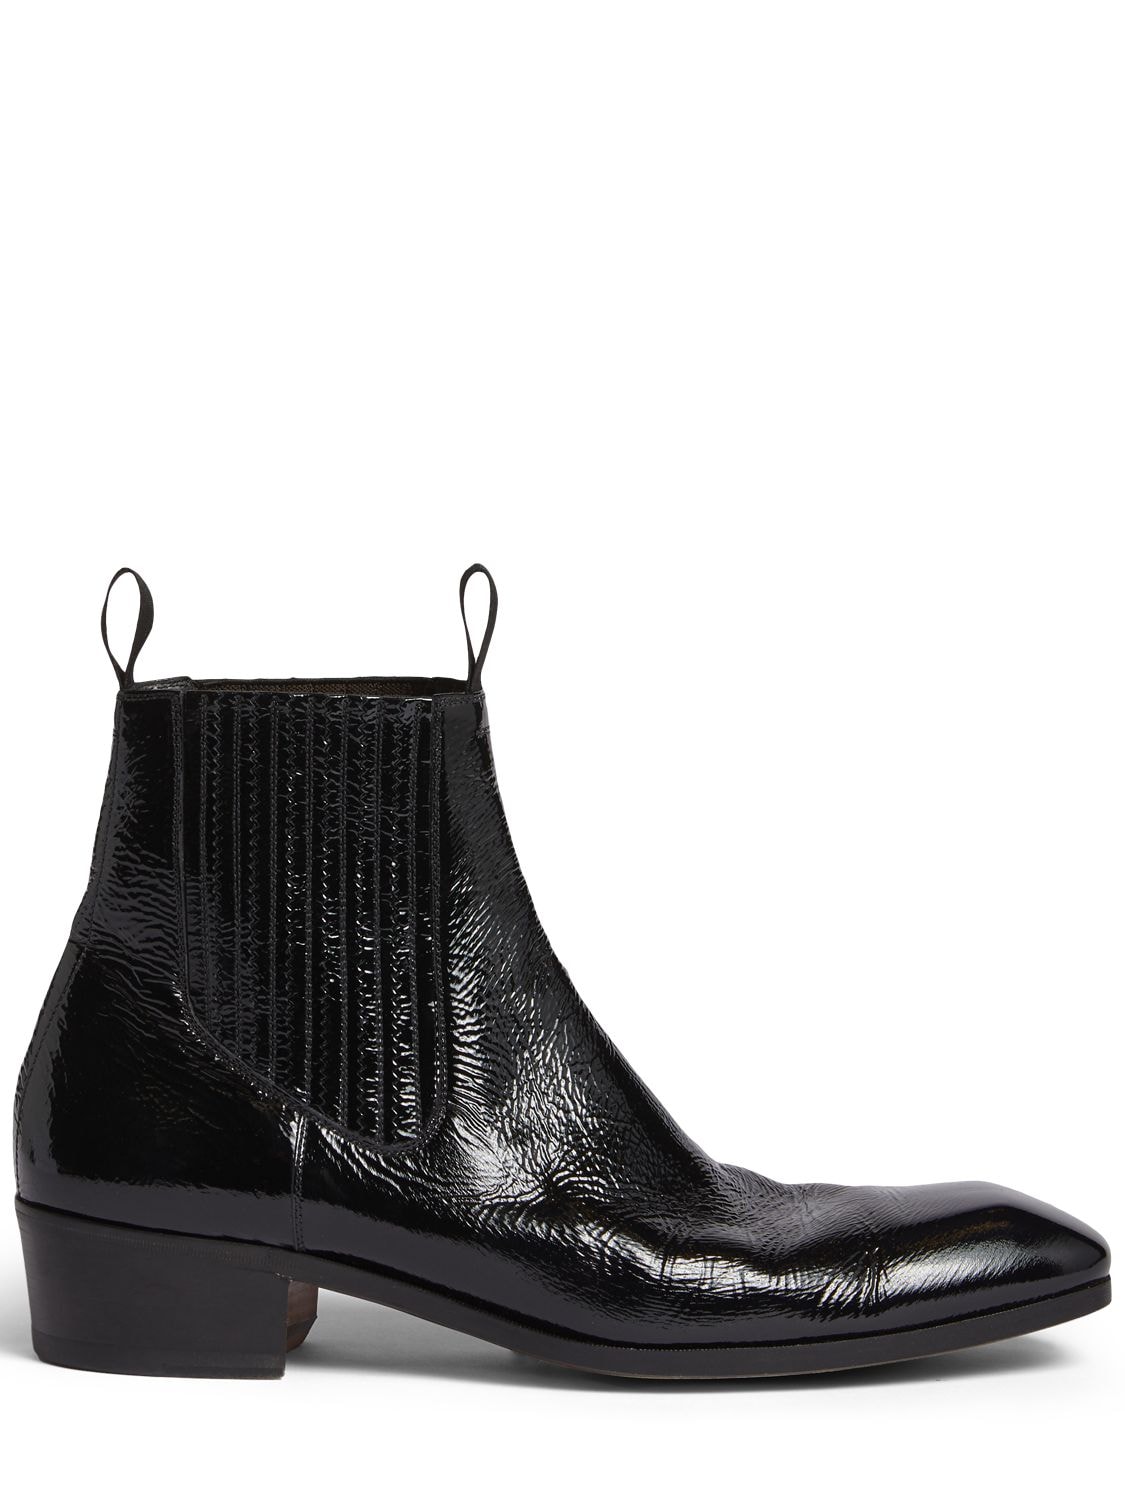 Tom Ford 40mm Crackle Leather Ankle Boots In Black